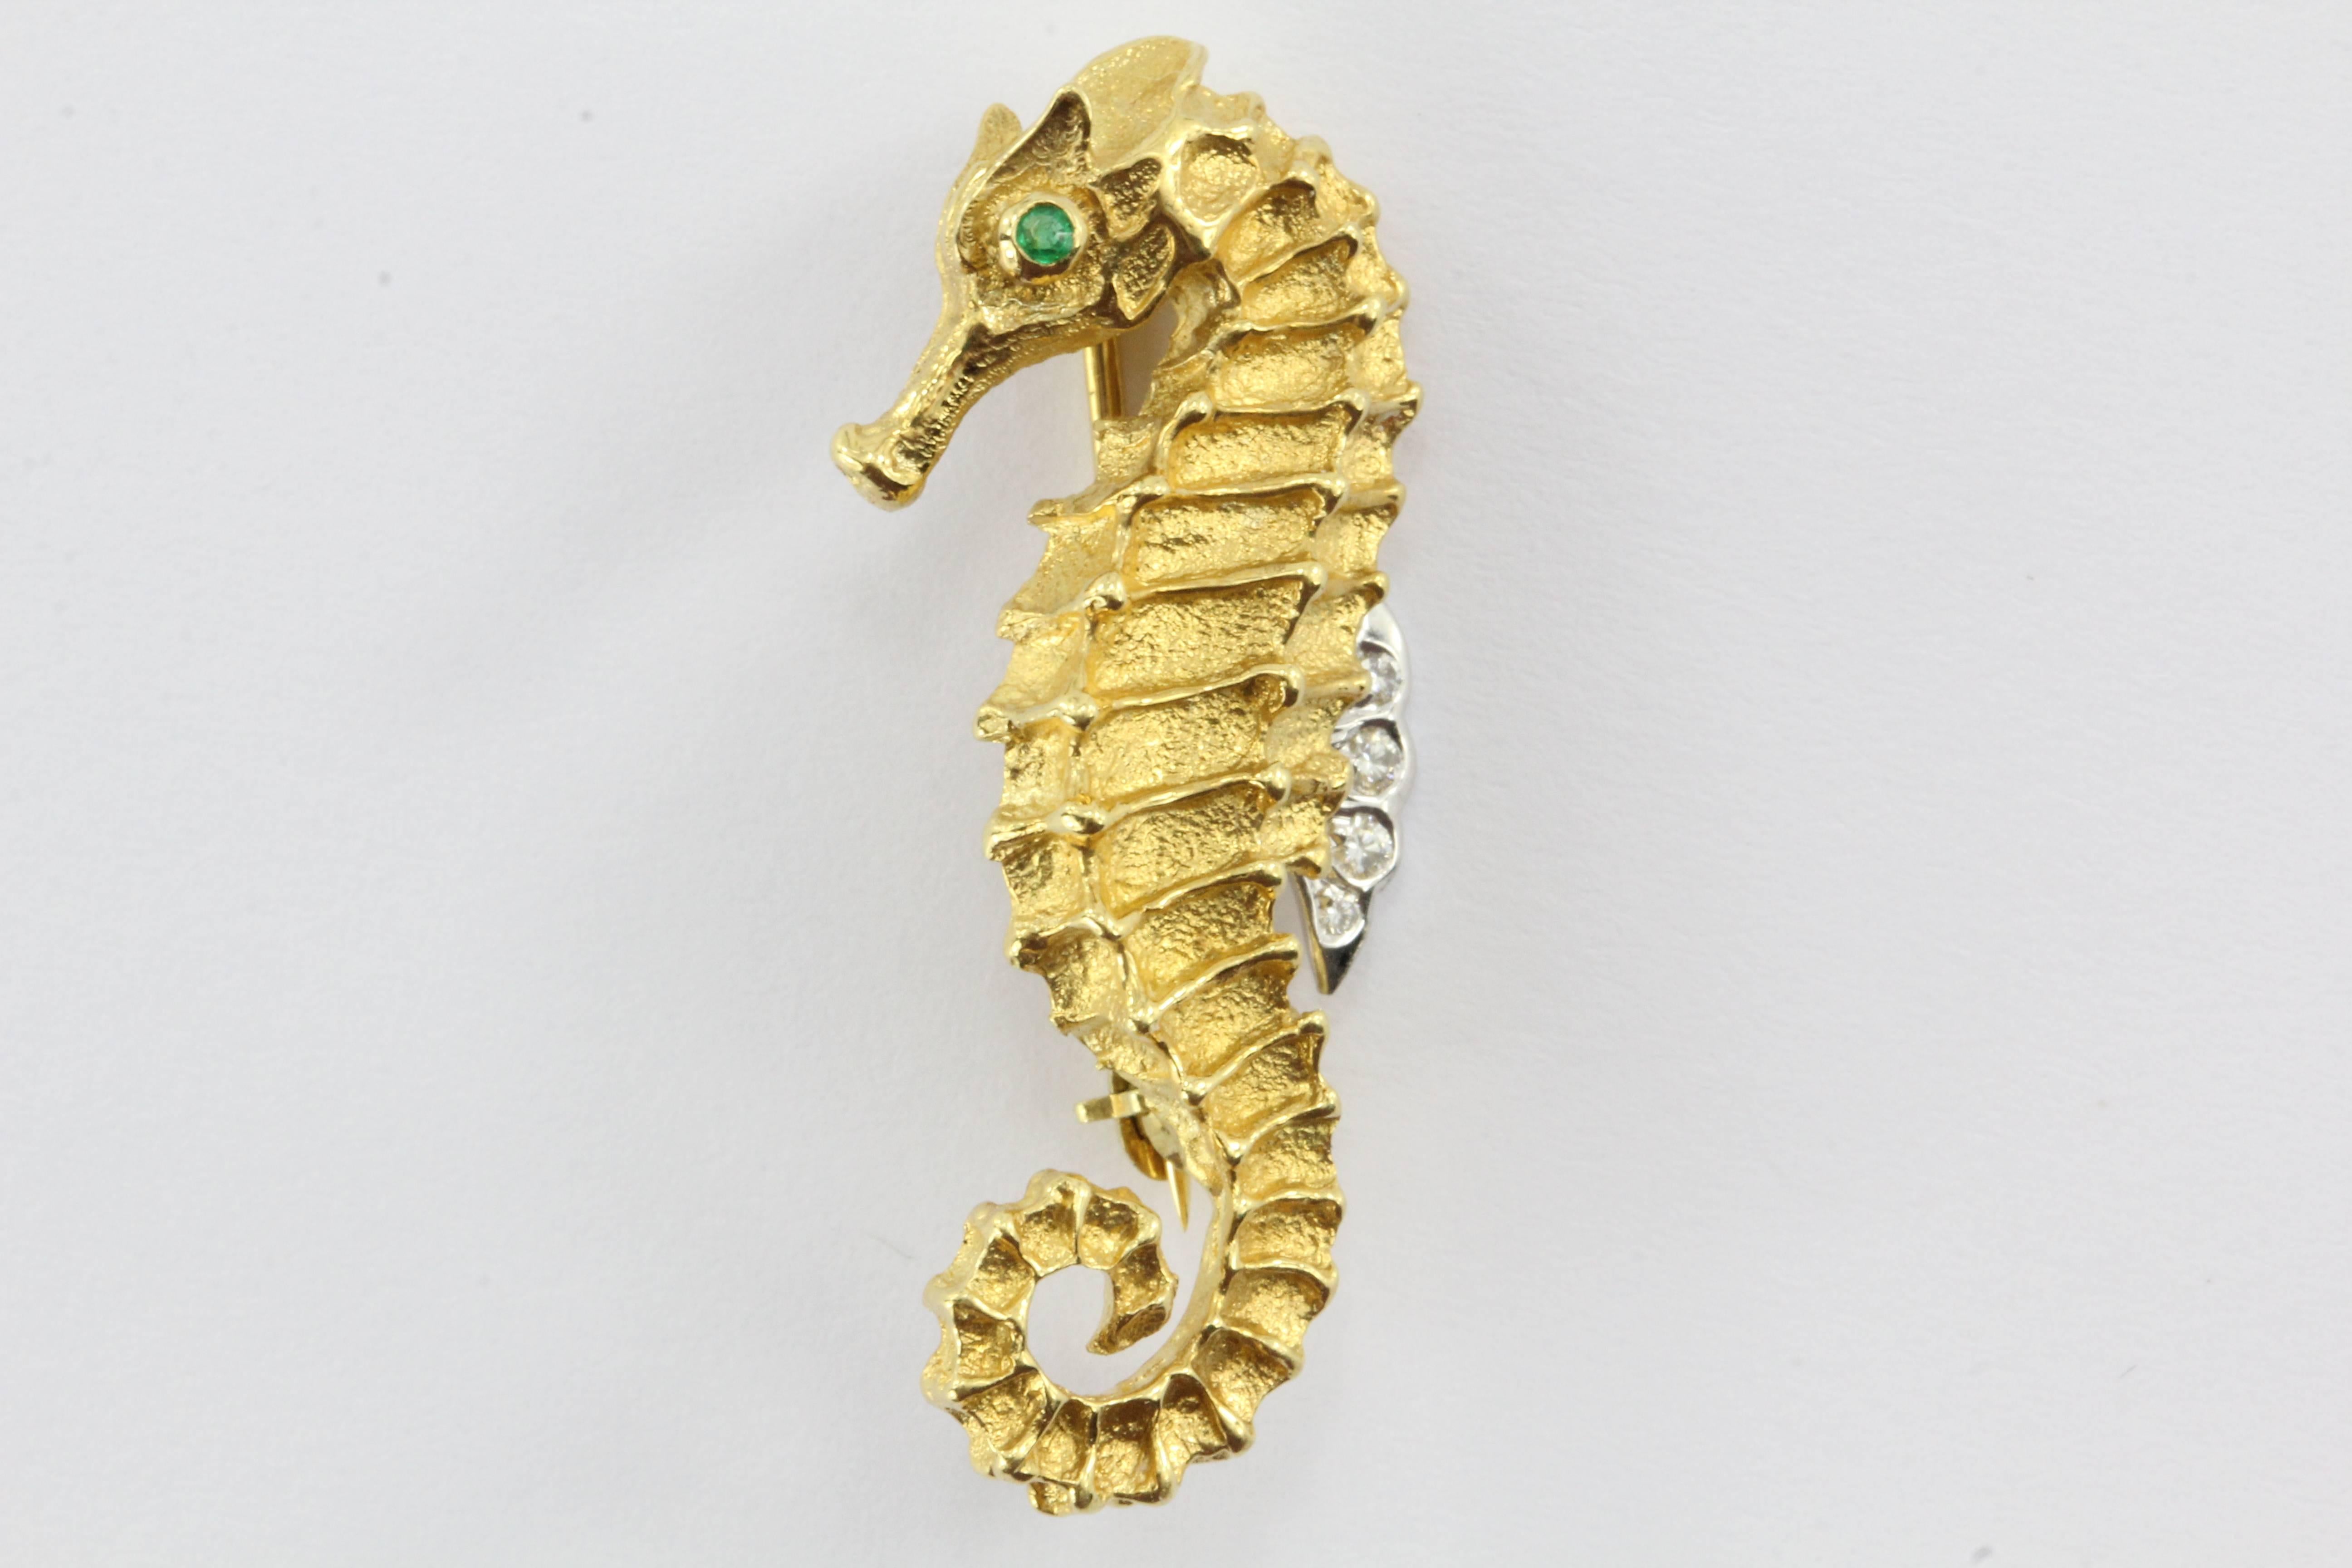 Rare Vintage Tiffany & Co 18k Gold Diamond Emerald Seahorse Pin Brooch.
Circa 1996 18k yellow and white gold diamond seahorse pin brooch with emerald eyes.
The diamonds are appoximately .04 tcw and emerald is .01 tcw.
The Brooch is approximately